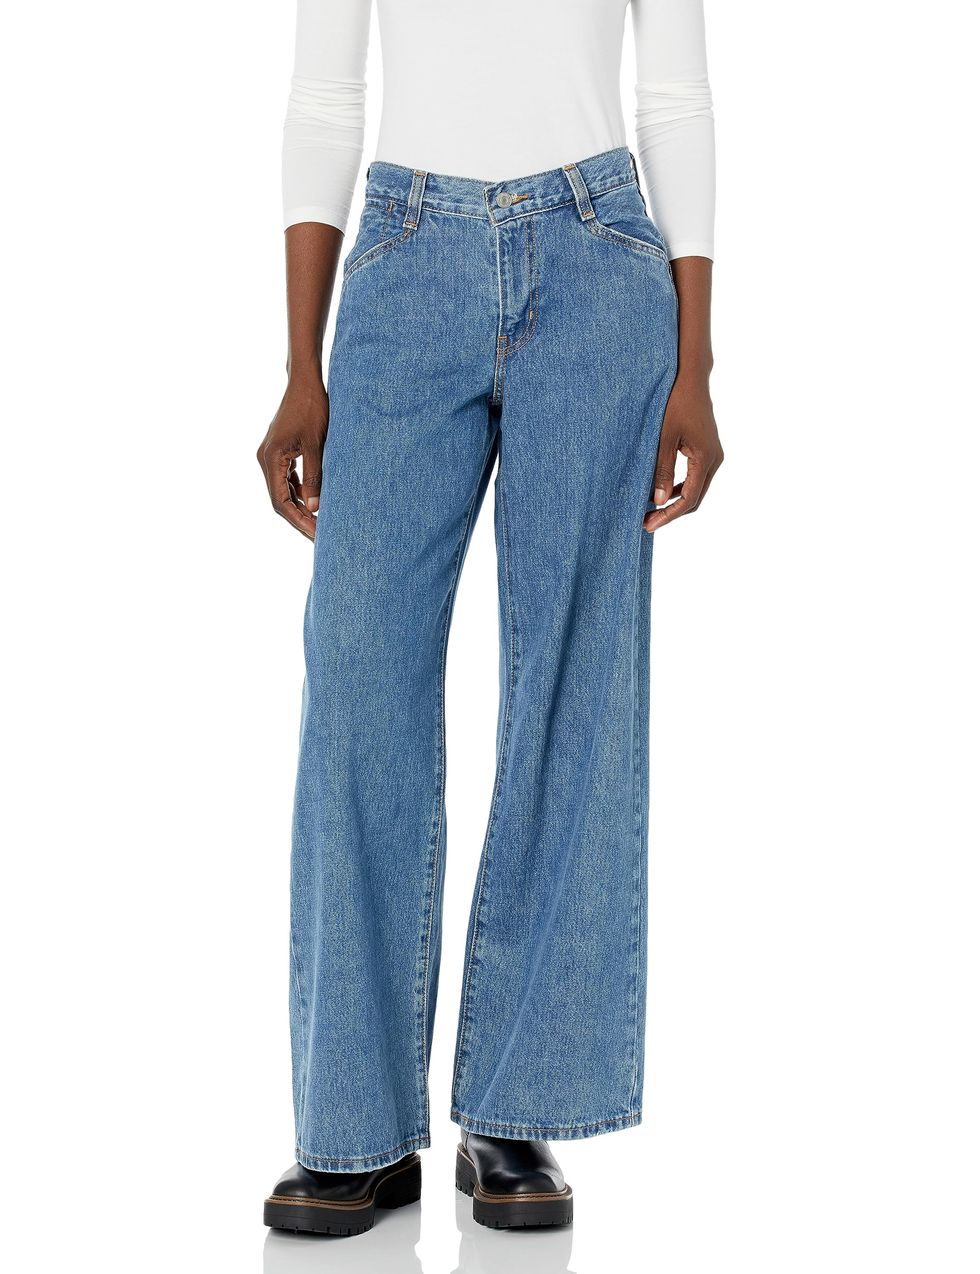 Levi's Women's 94 Baggy Wide Leg Jean (Also Available in Plus), Take Chances, 24